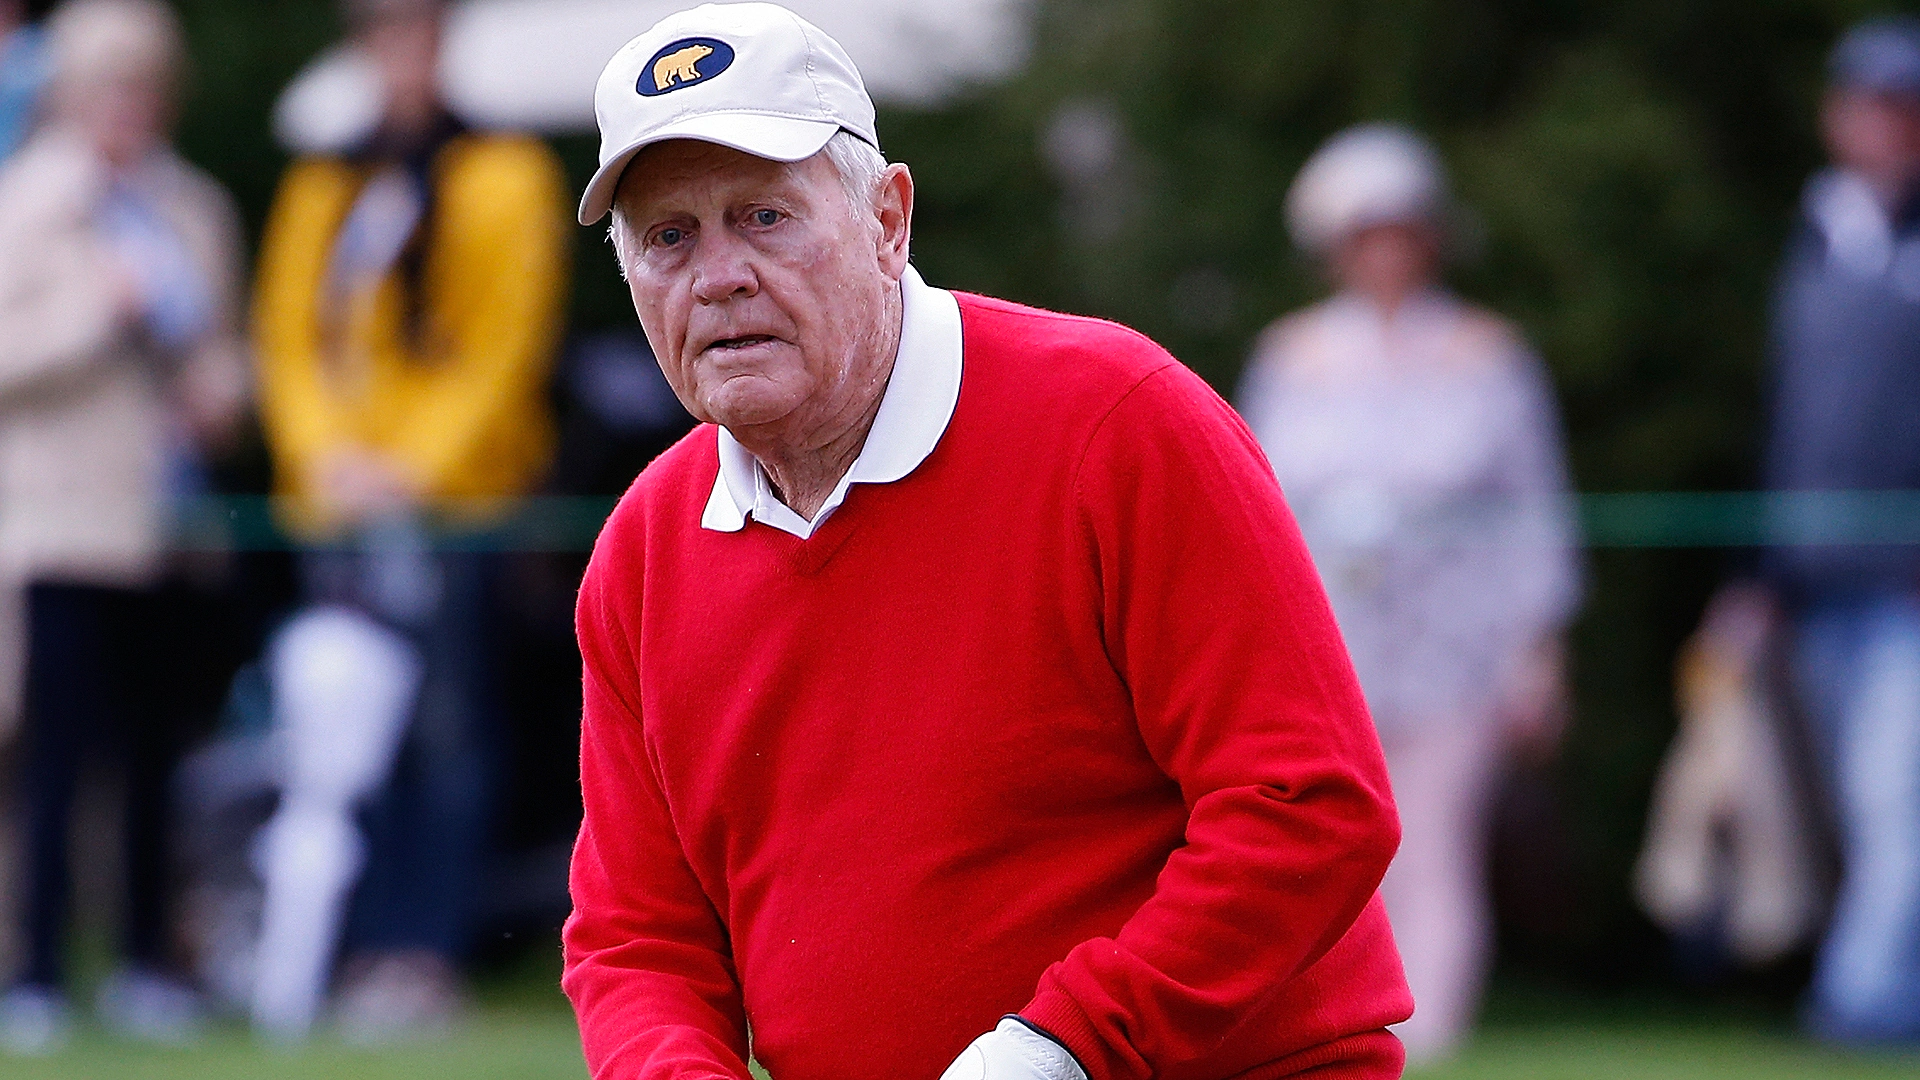 Nicklaus had experimental therapy for back pain